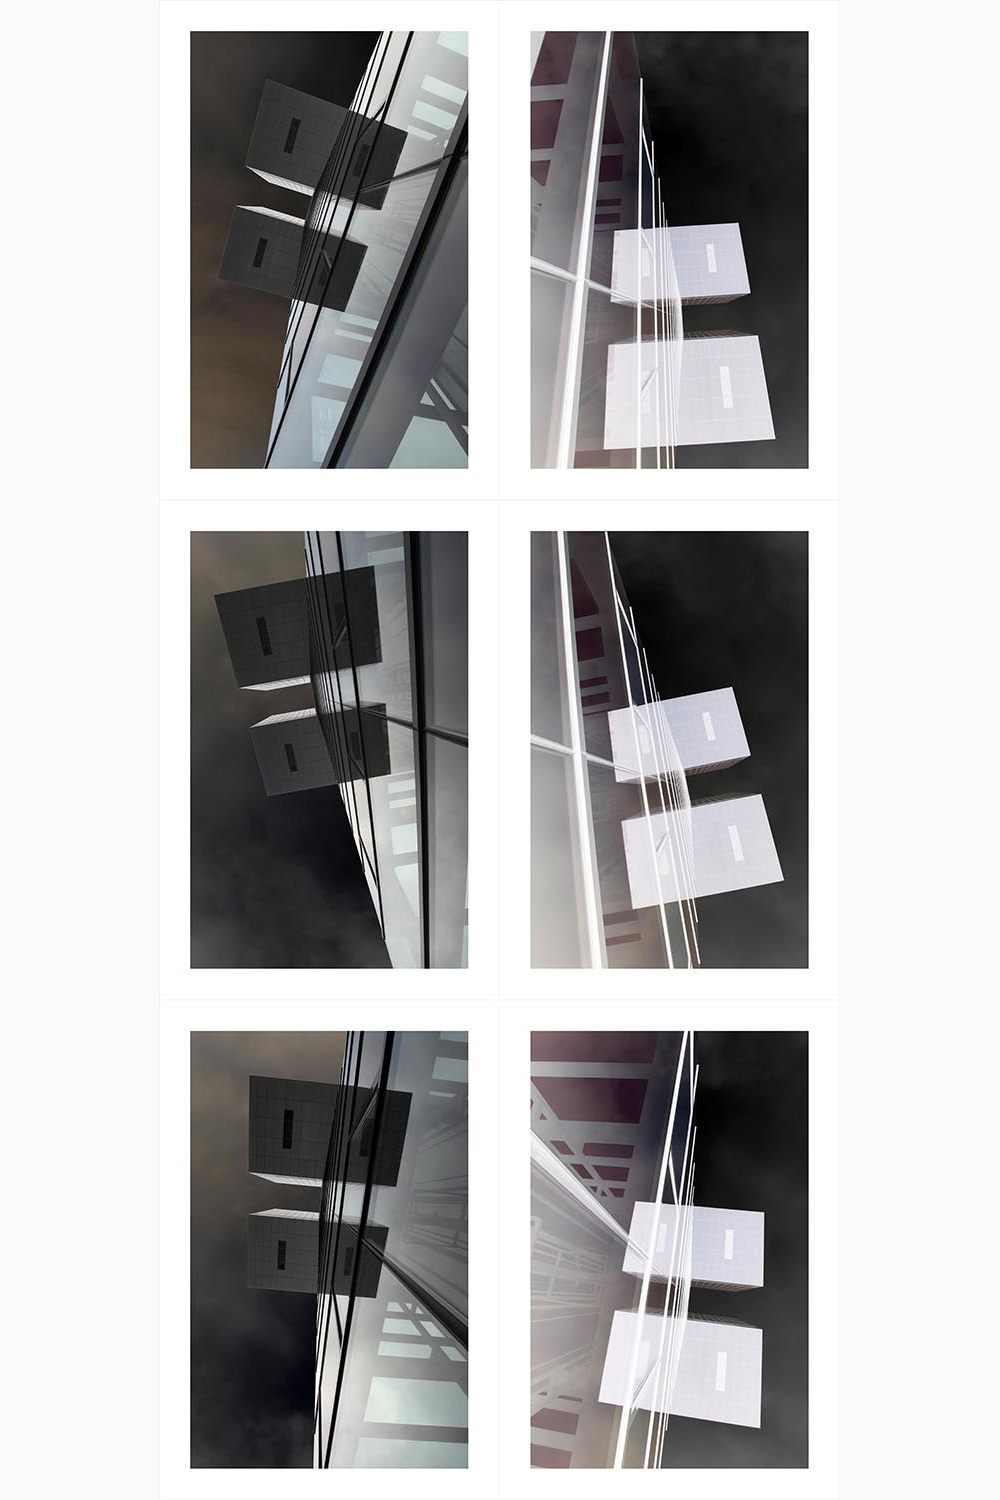   Spinal Structure in Transformation  2015  Archival inkjet on cotton rag paper  145cm high x 66cm wide  6 panels, each 48.3cm high x 33cm wide 